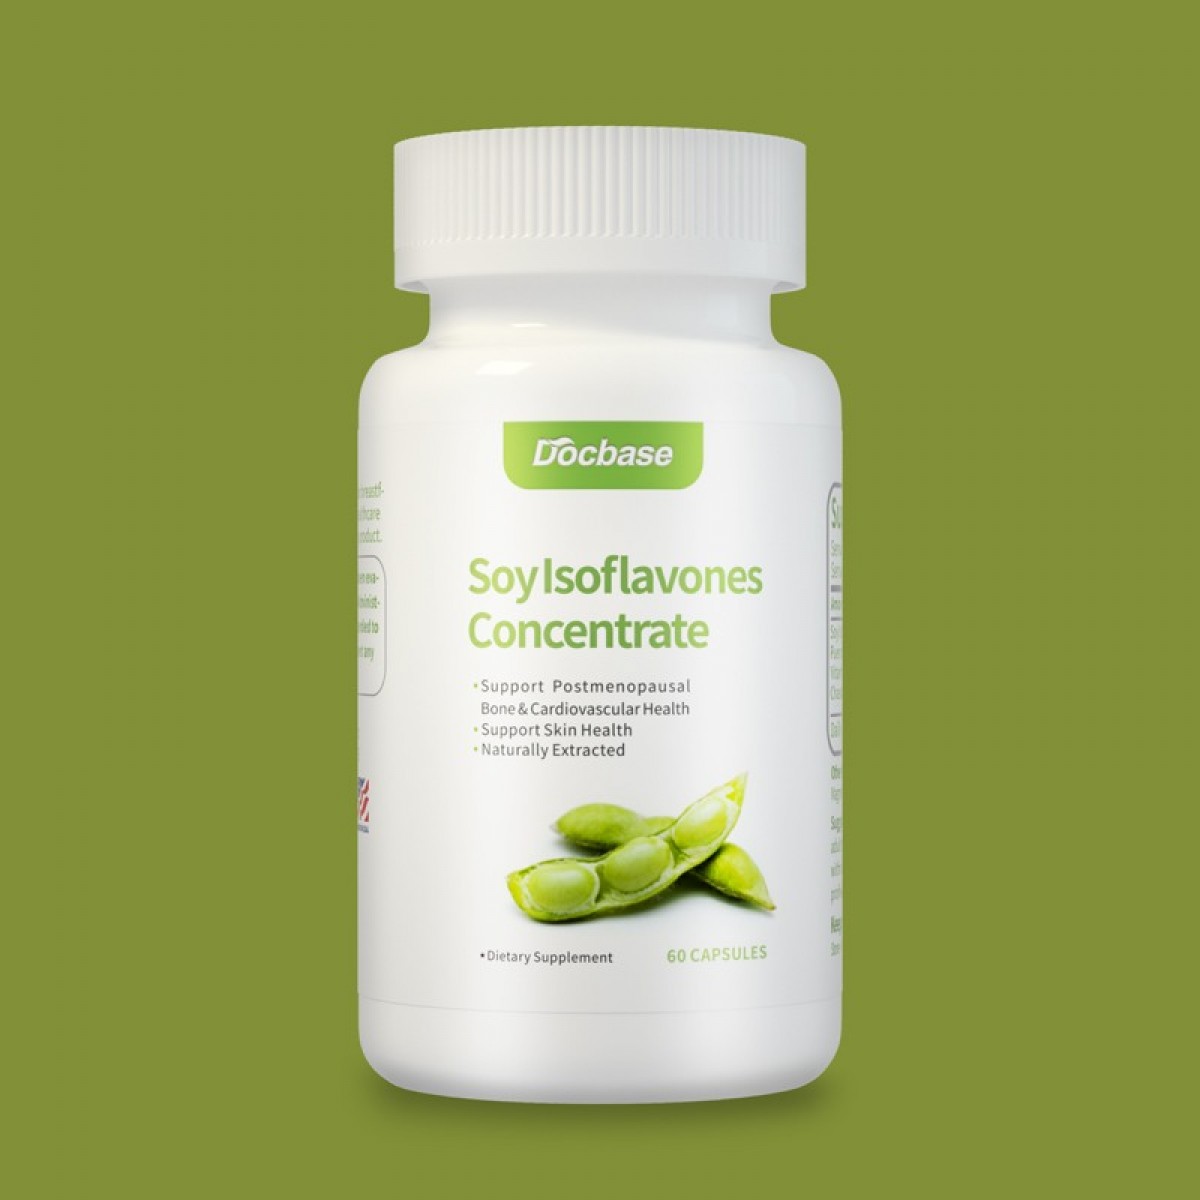 Docbase |Soylsoflavones Concentrate｜Soyb